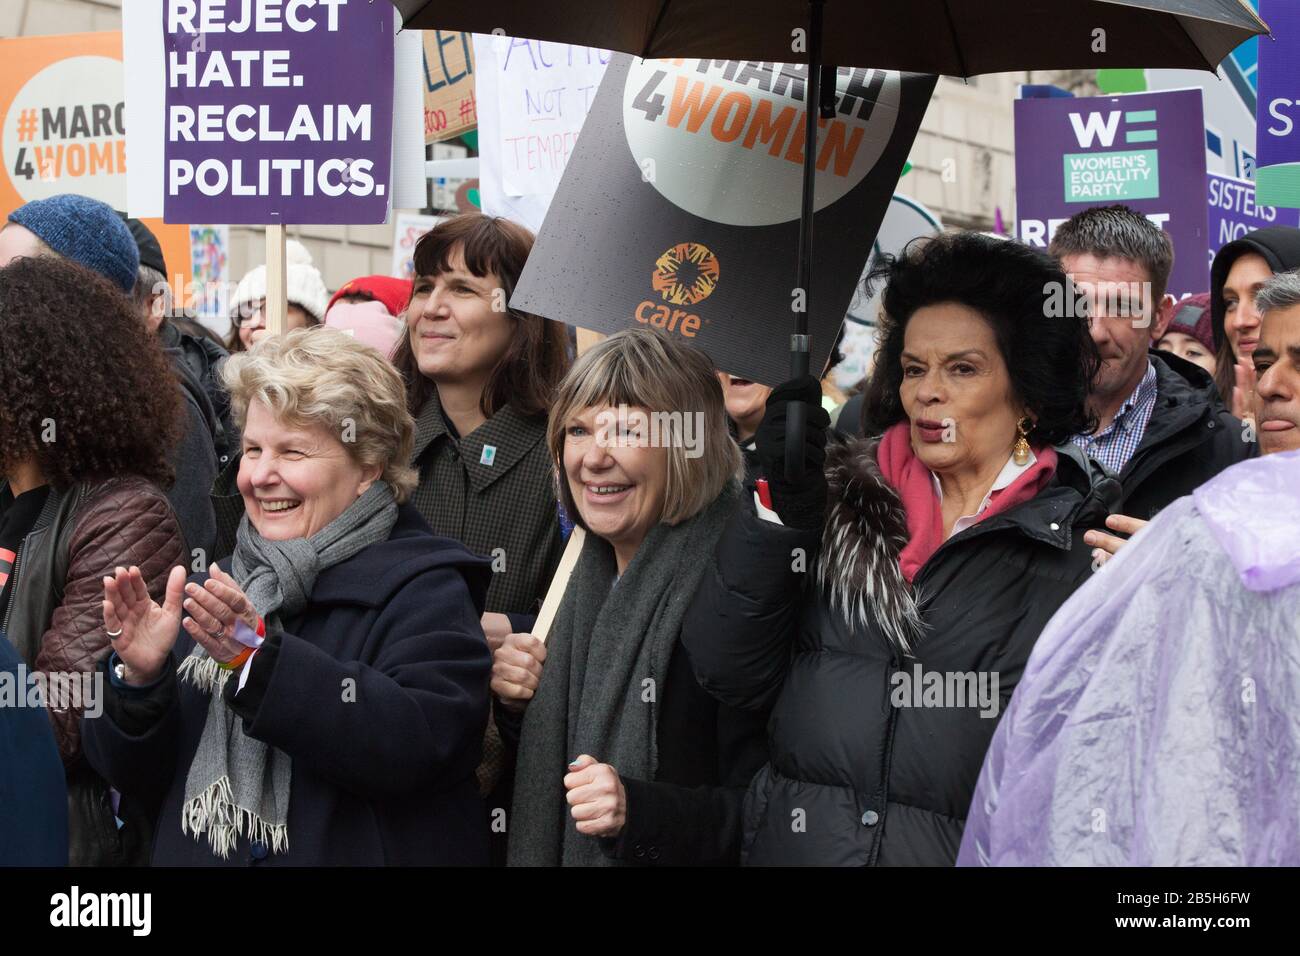 London, UK. 8th Mar 2020. Celebrities, campaigners and politicians joined the March4Women, organised by Care and the Women's Equality Party, to mark International Women's Day.  L-R: Sandi Toksvig, Catherine Mayer, Jude Kelly and Bianca Jagger. Anna Watson/Alamy Live News Stock Photo